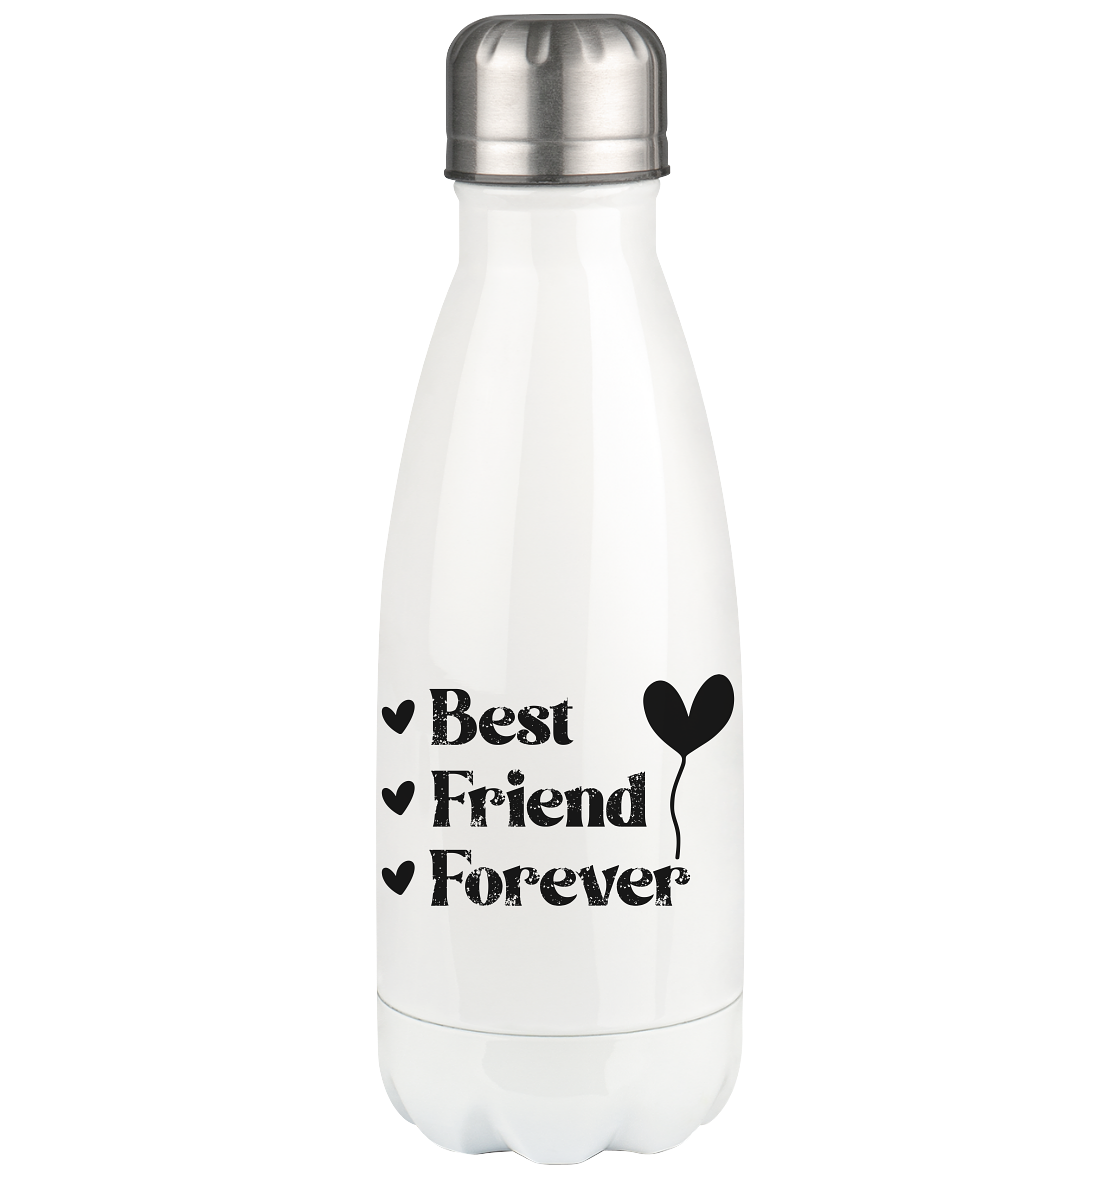 Best Friend Forever - Thermoflasche 350ml